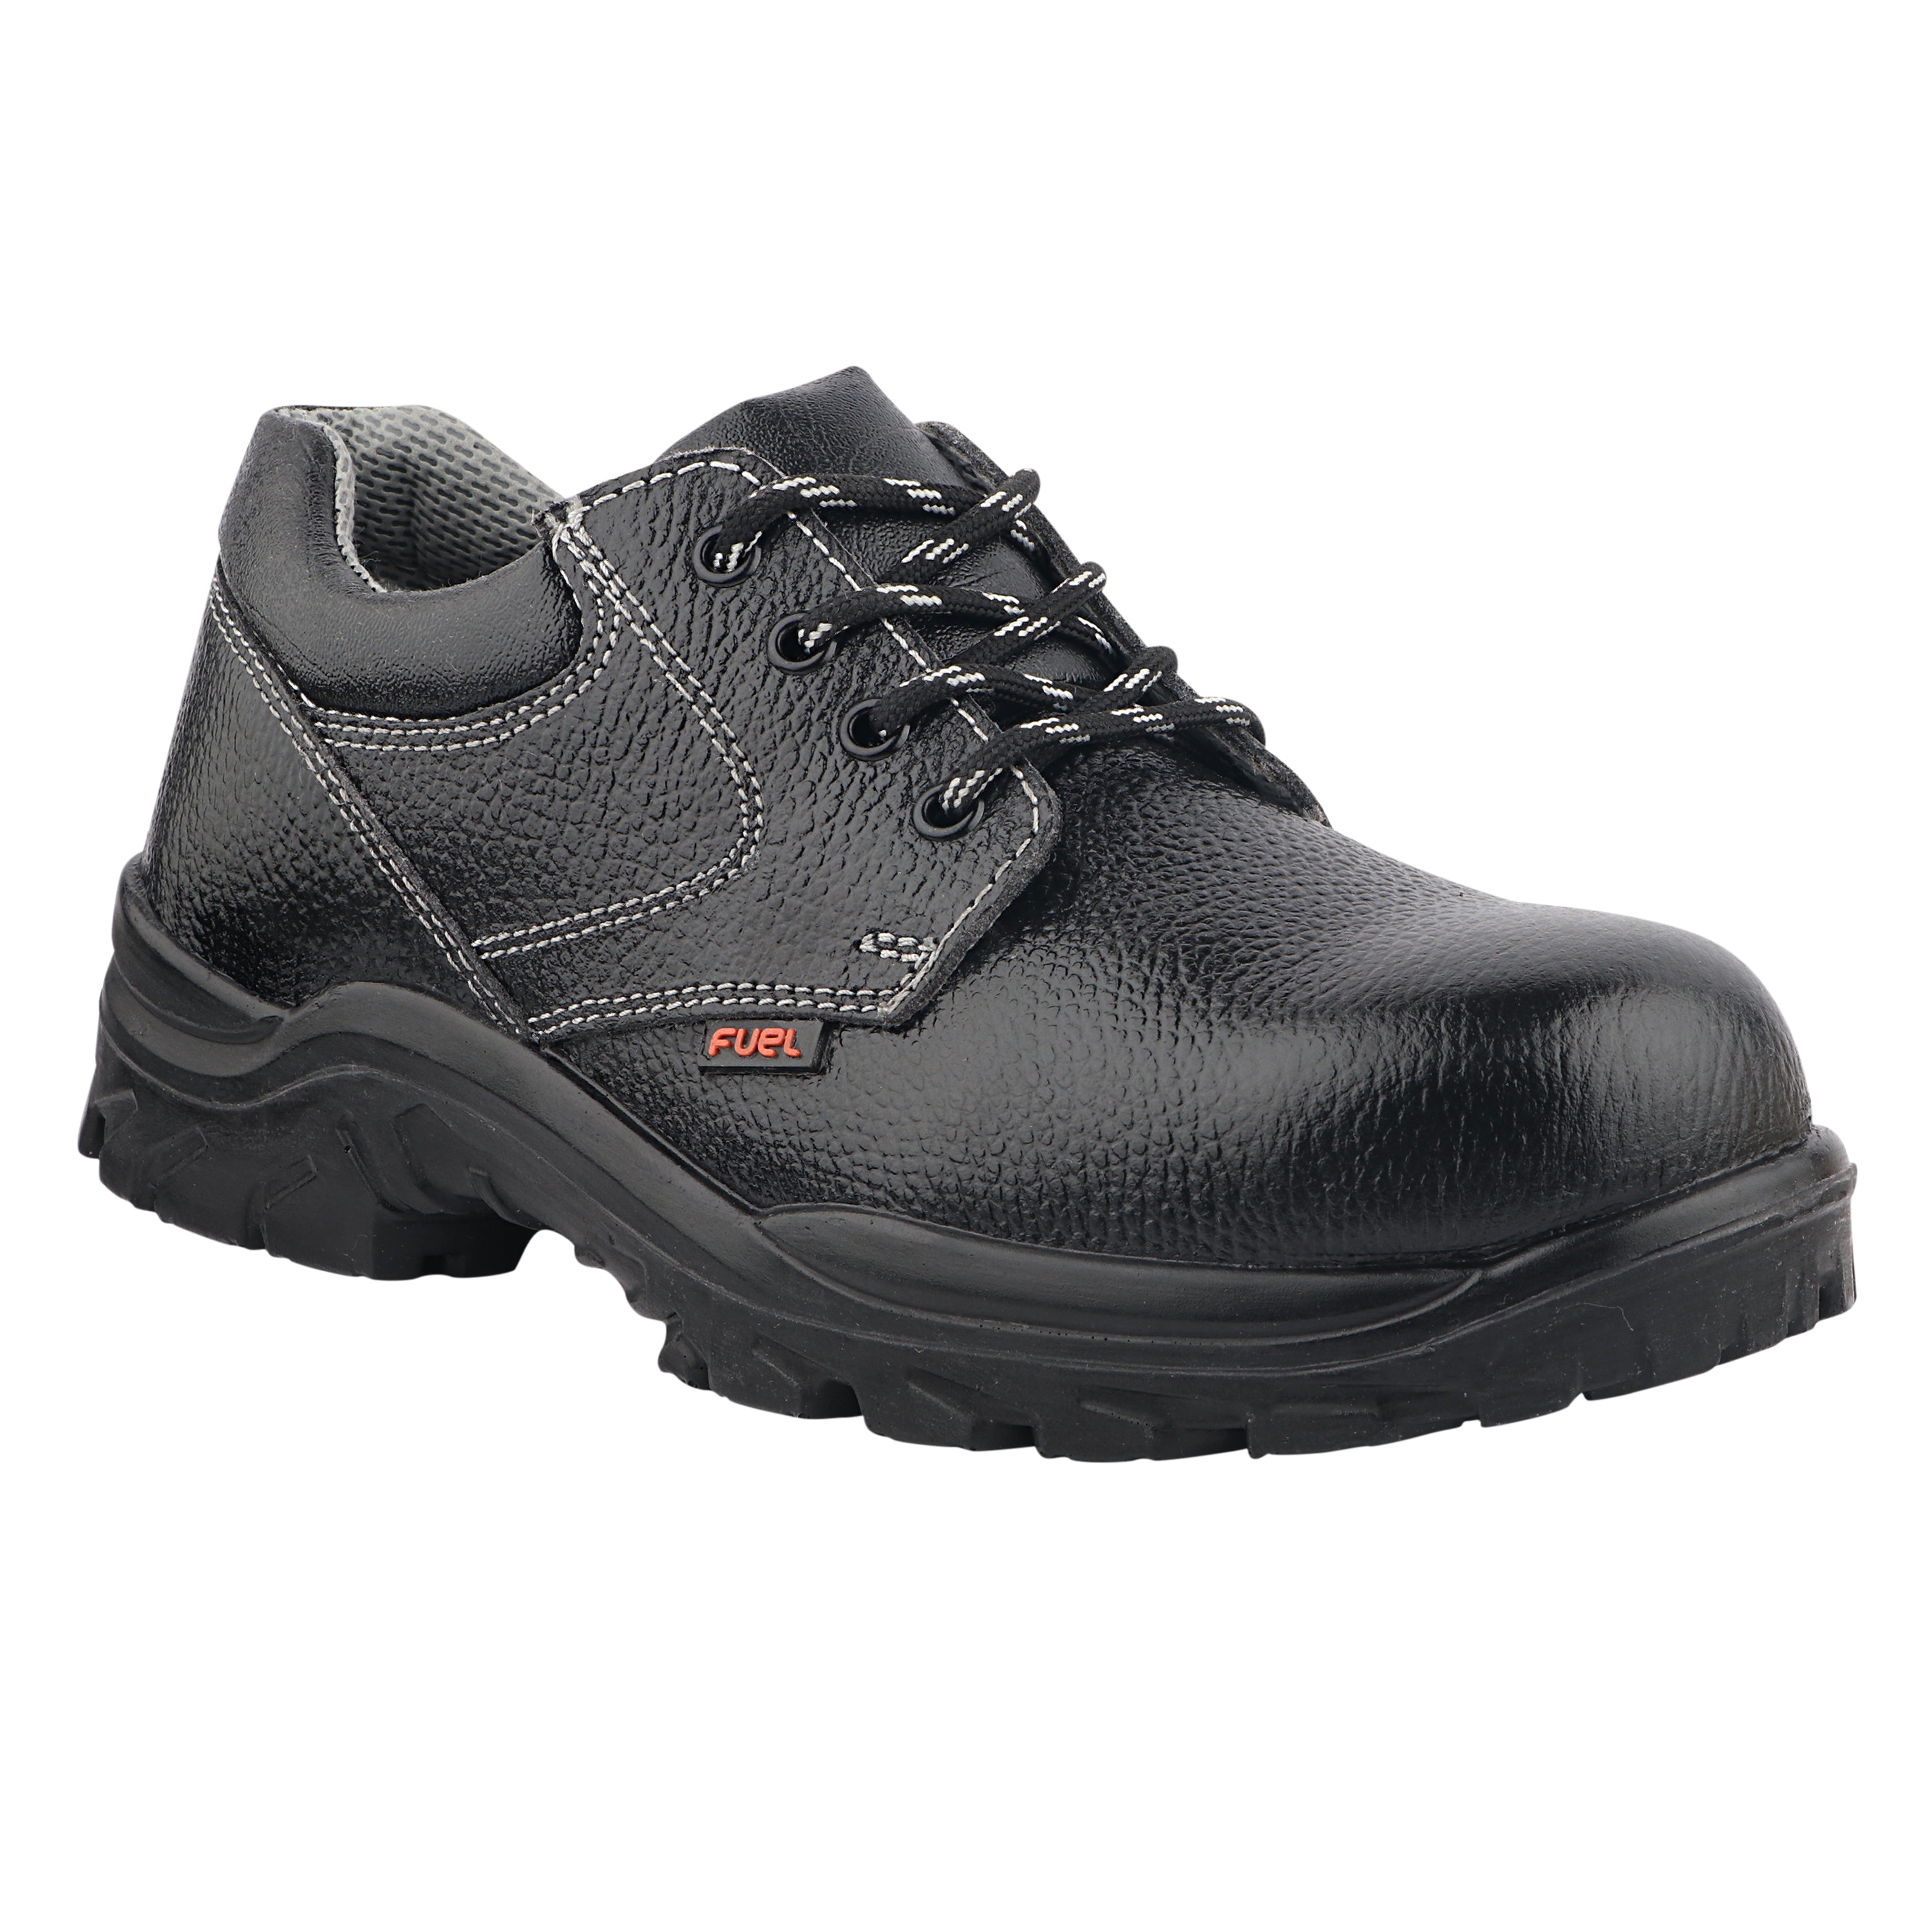 Fuel Gorilla Genuine Leather Safety Shoes for Men's Steel Toe Cap With Single Density PU Sole (Black)